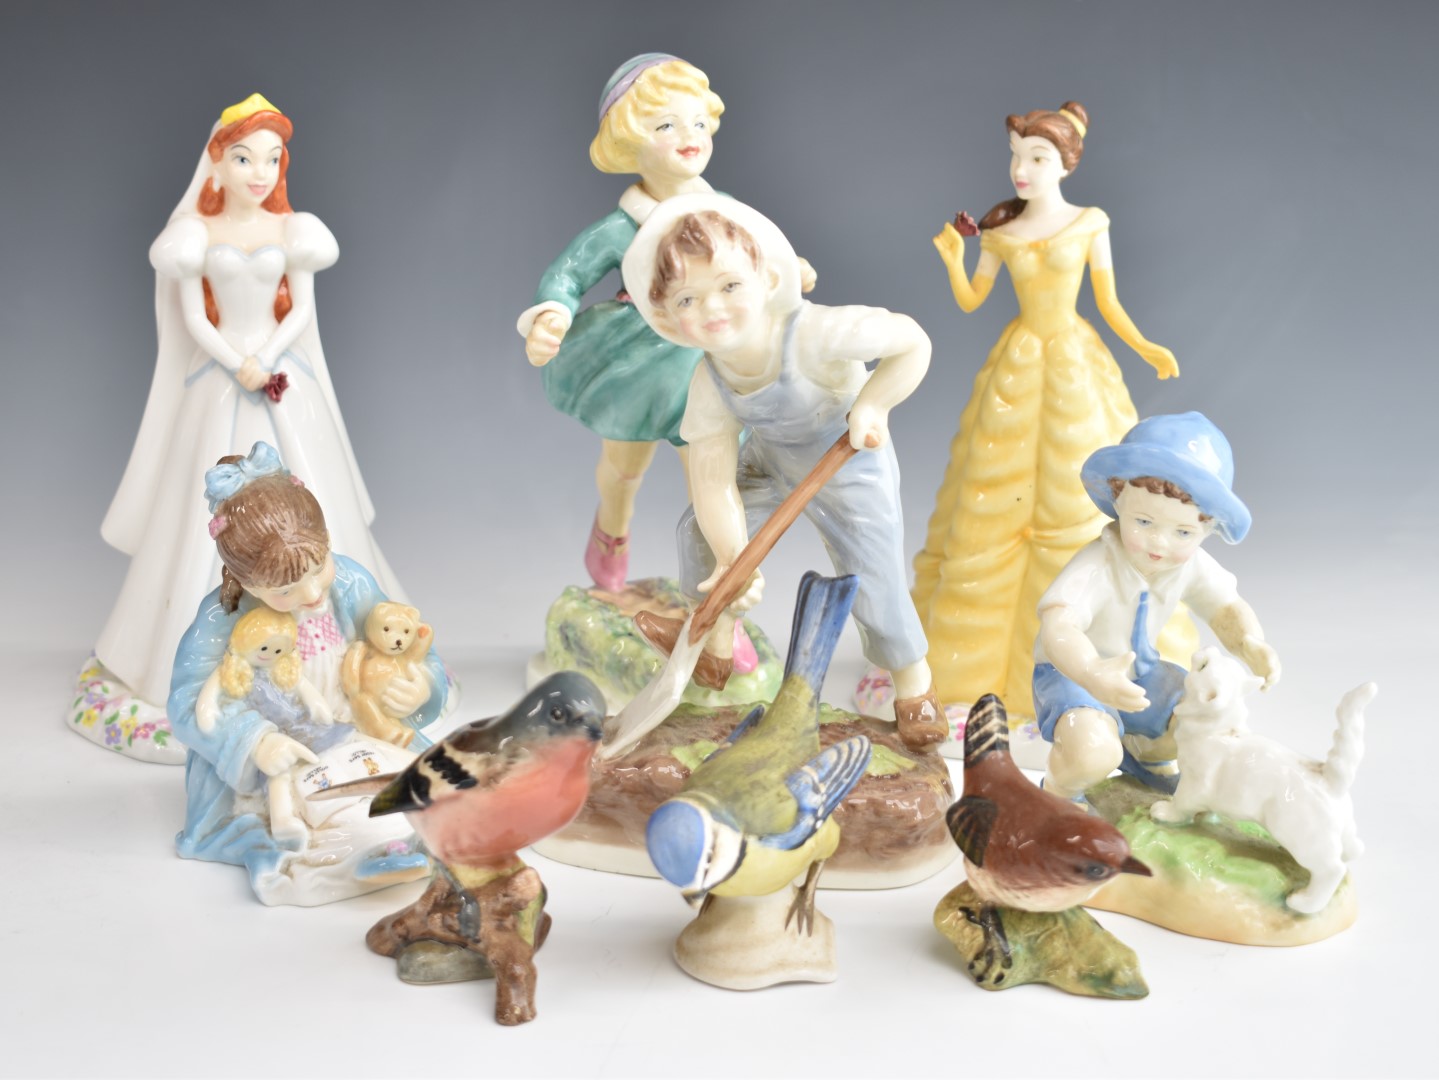 Royal Worcester, Doulton and Beswick figures including Disney princesses Ariel and Belle, tallest